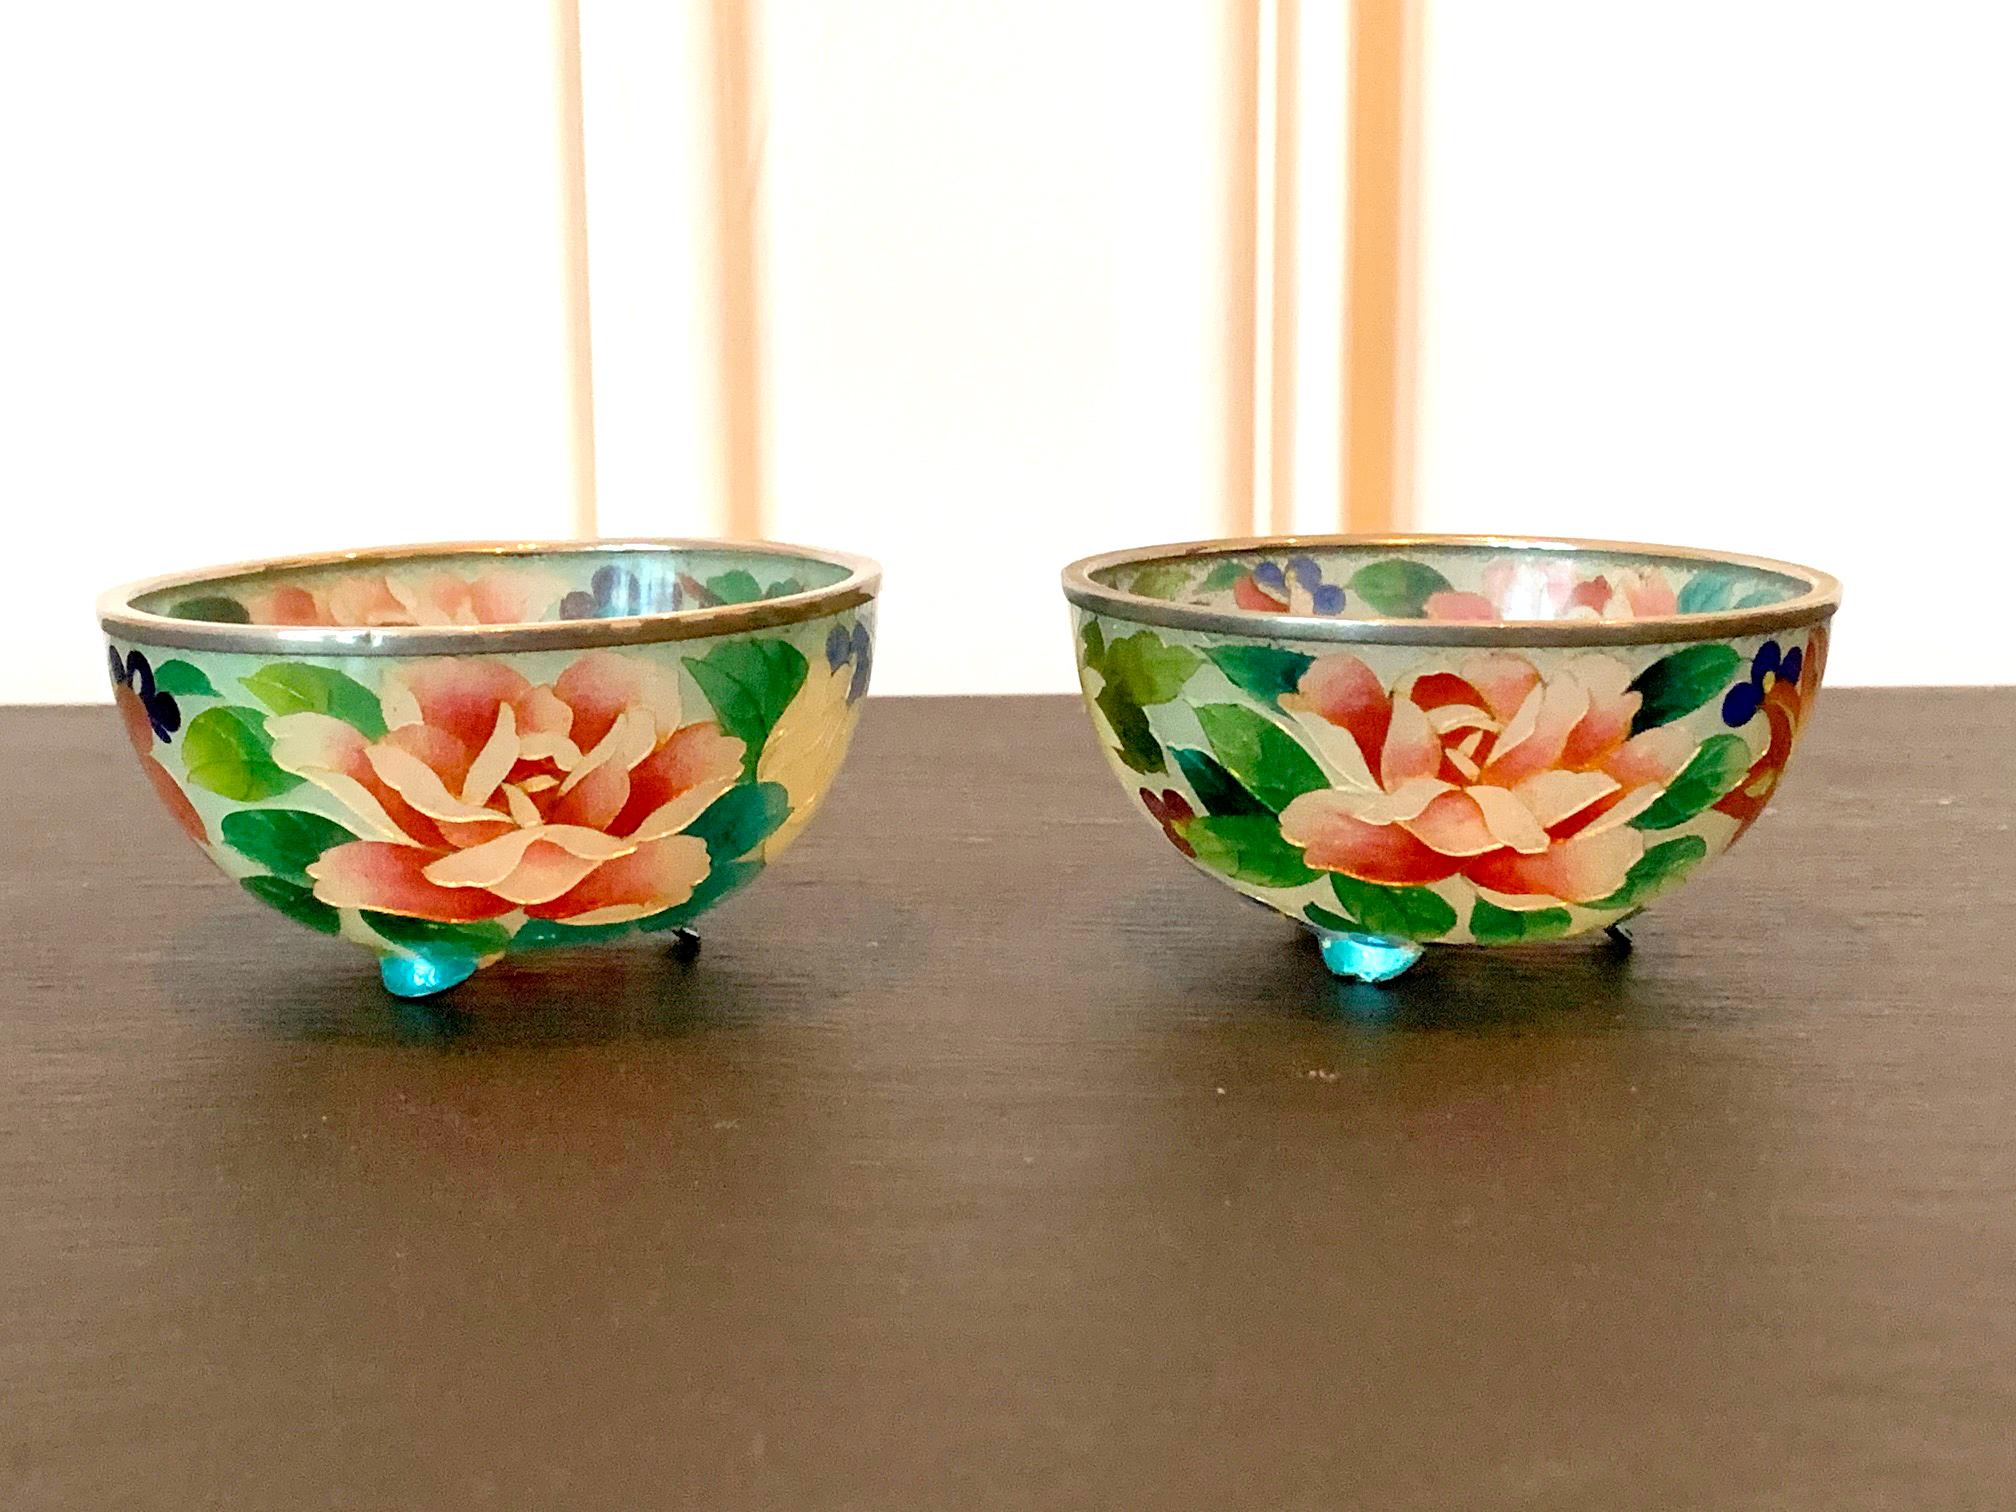 A pair of small but exquisite Plique-a-jour cloisonné bowls with nearly identical design from Nagoya area in Japan circa 1900-20s. Maker's unknown but possibly by Ando company. The technique was hard to master as no wires were used to hold together